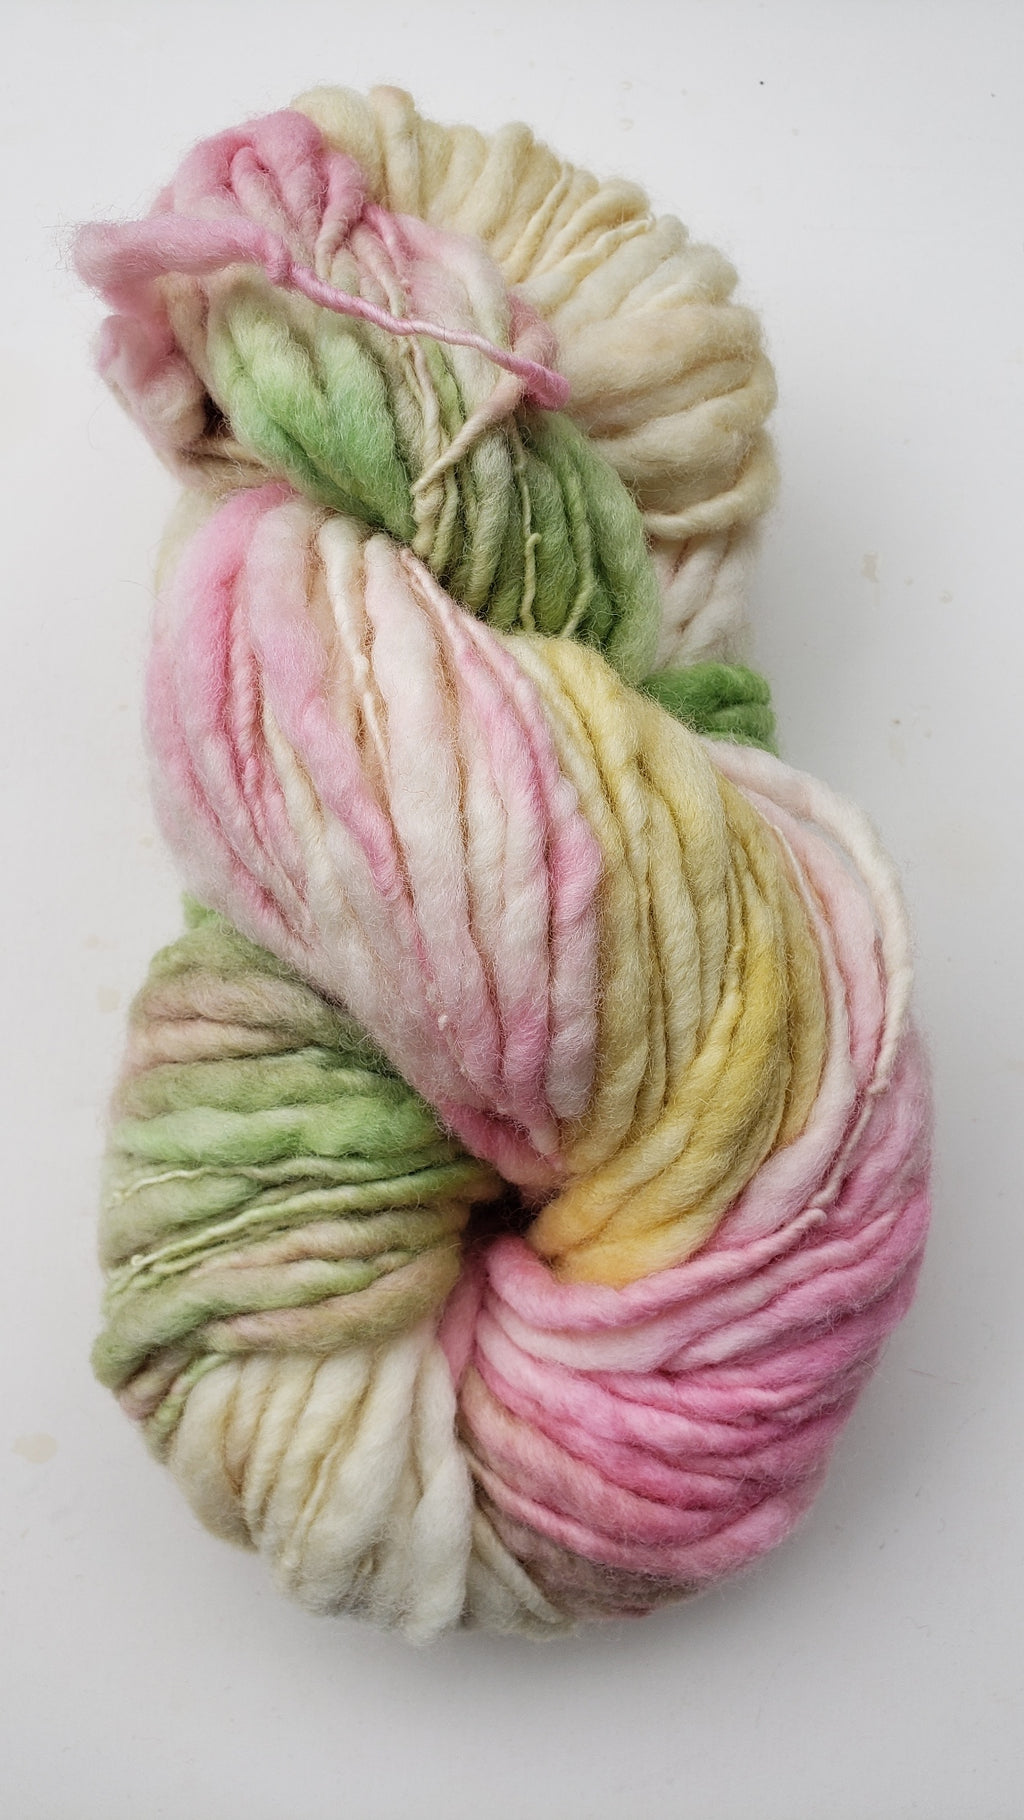 Slubby - APPLE BLOSSOM -  Merino/Blue Face Leicester - Hand Dyed Textured Yarn Thick and Thin